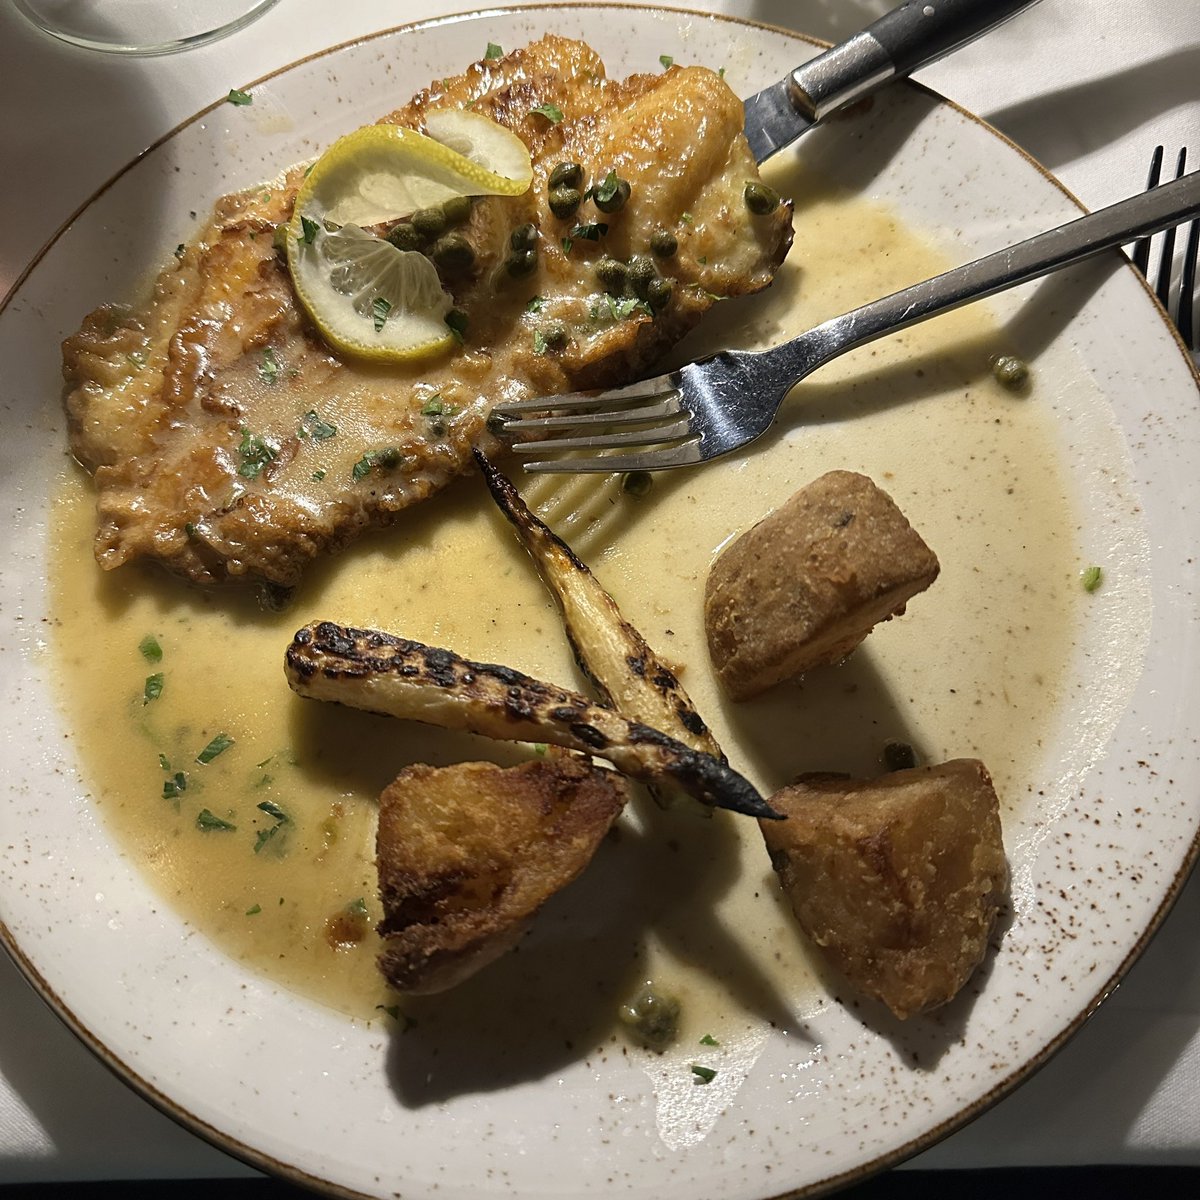 I’ve been told by my appreciated followers that one reason they enjoy my posts is because of my impartial honesty. This is my first time having Sole Meunière 🎣 Tasted Great! But thought the presentation was uninspired for a pricey dish. Opinions? 
At Vitolo #FLL 🇮🇹